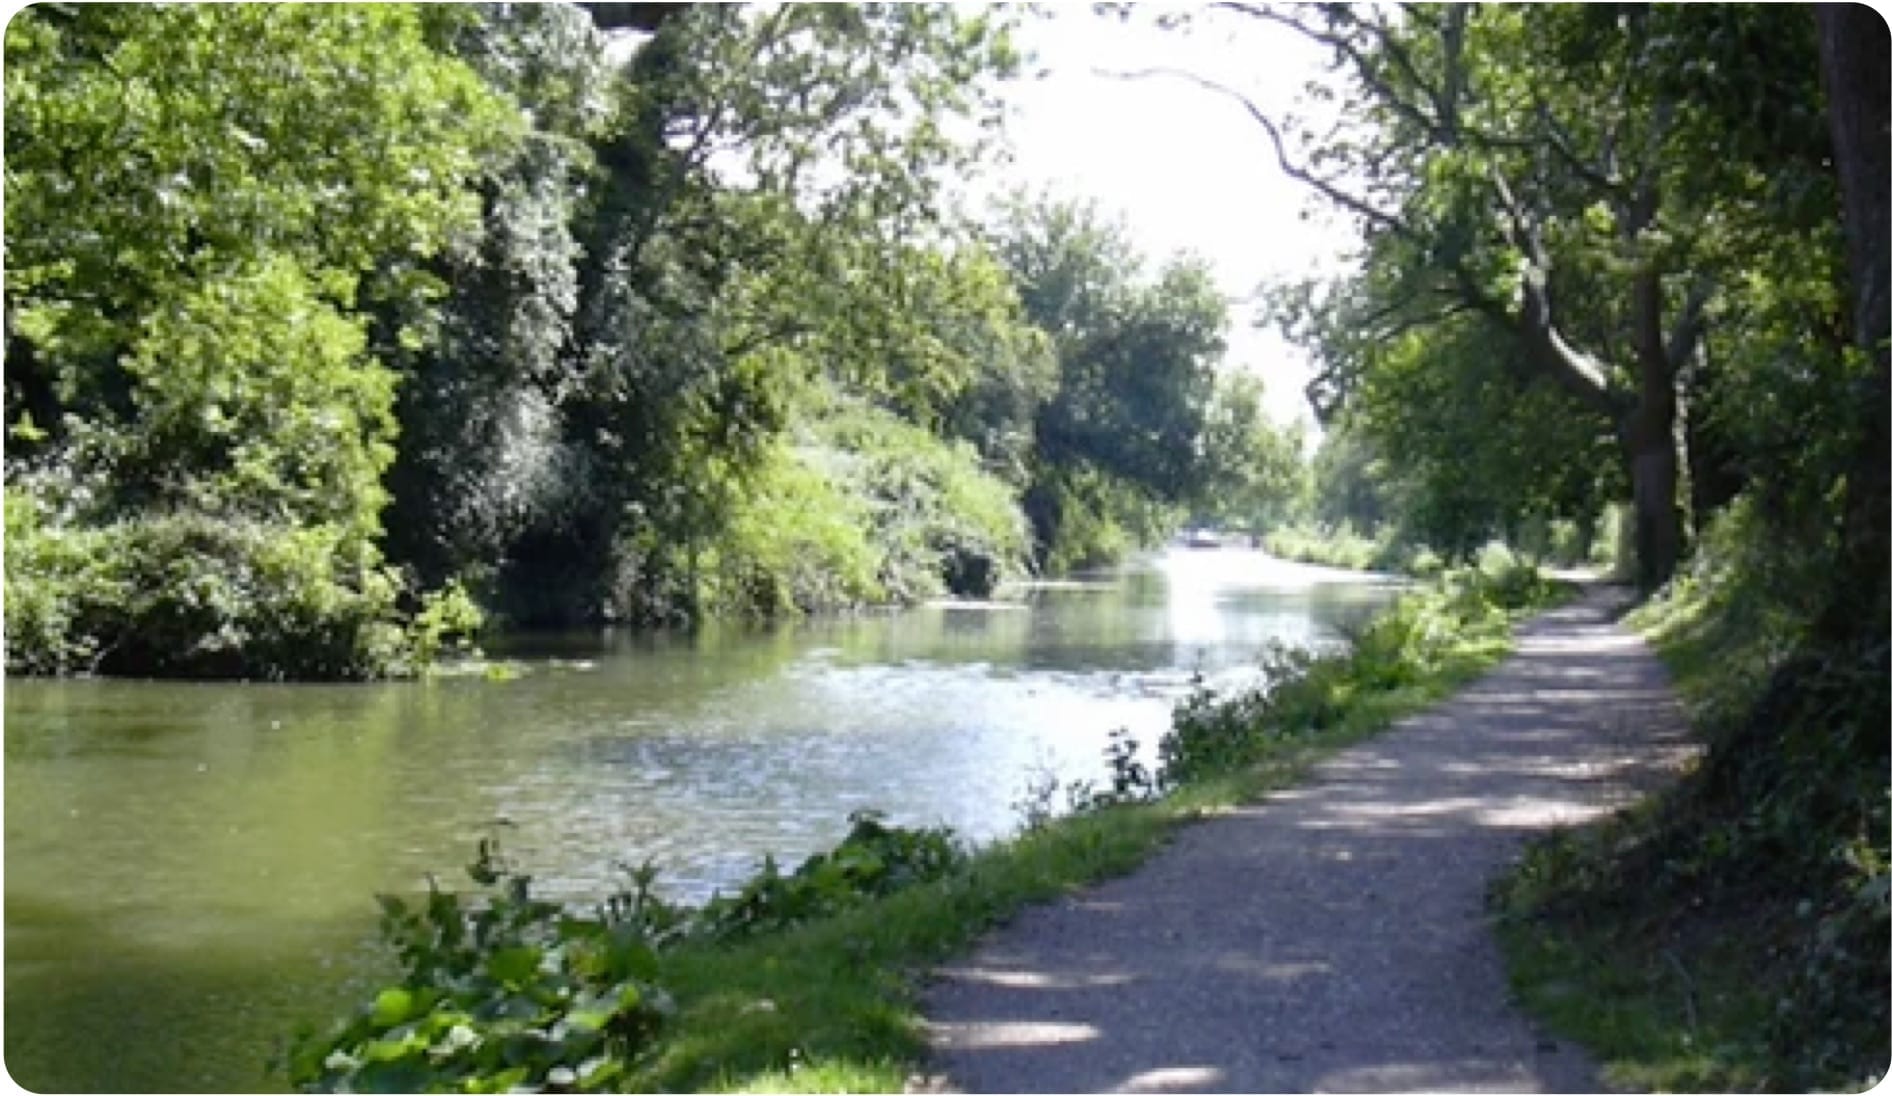 With our Chichester Campervan Hire you can enjoy trips to the Chichester Canal.